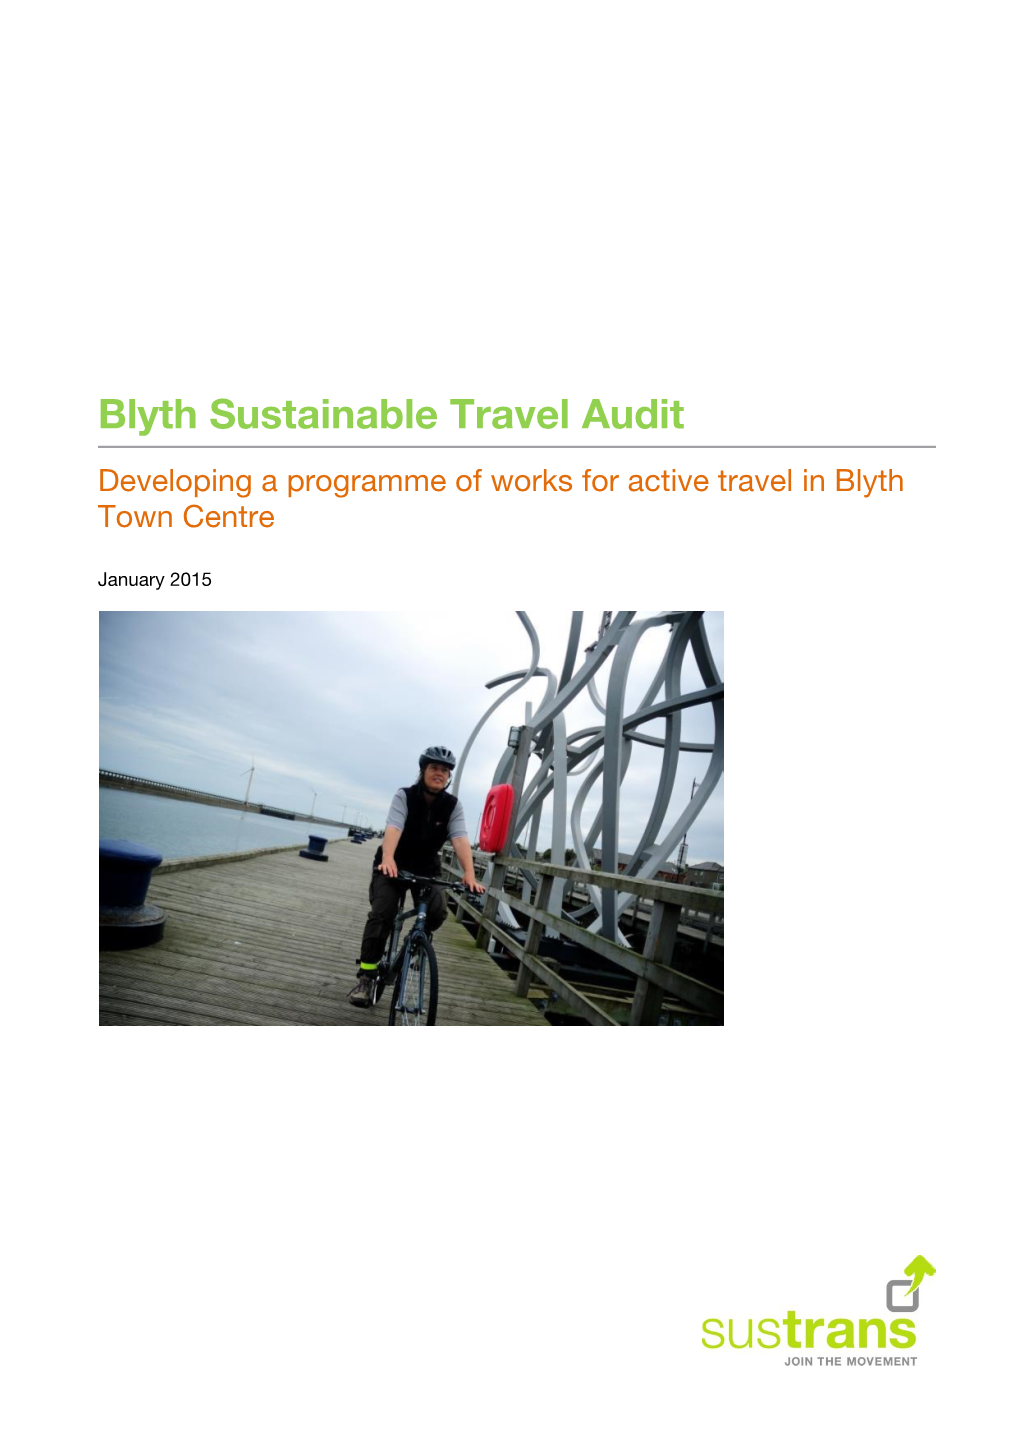 Blyth Sustainable Travel Audit Developing a Programme of Works for Active Travel in Blyth Town Centre